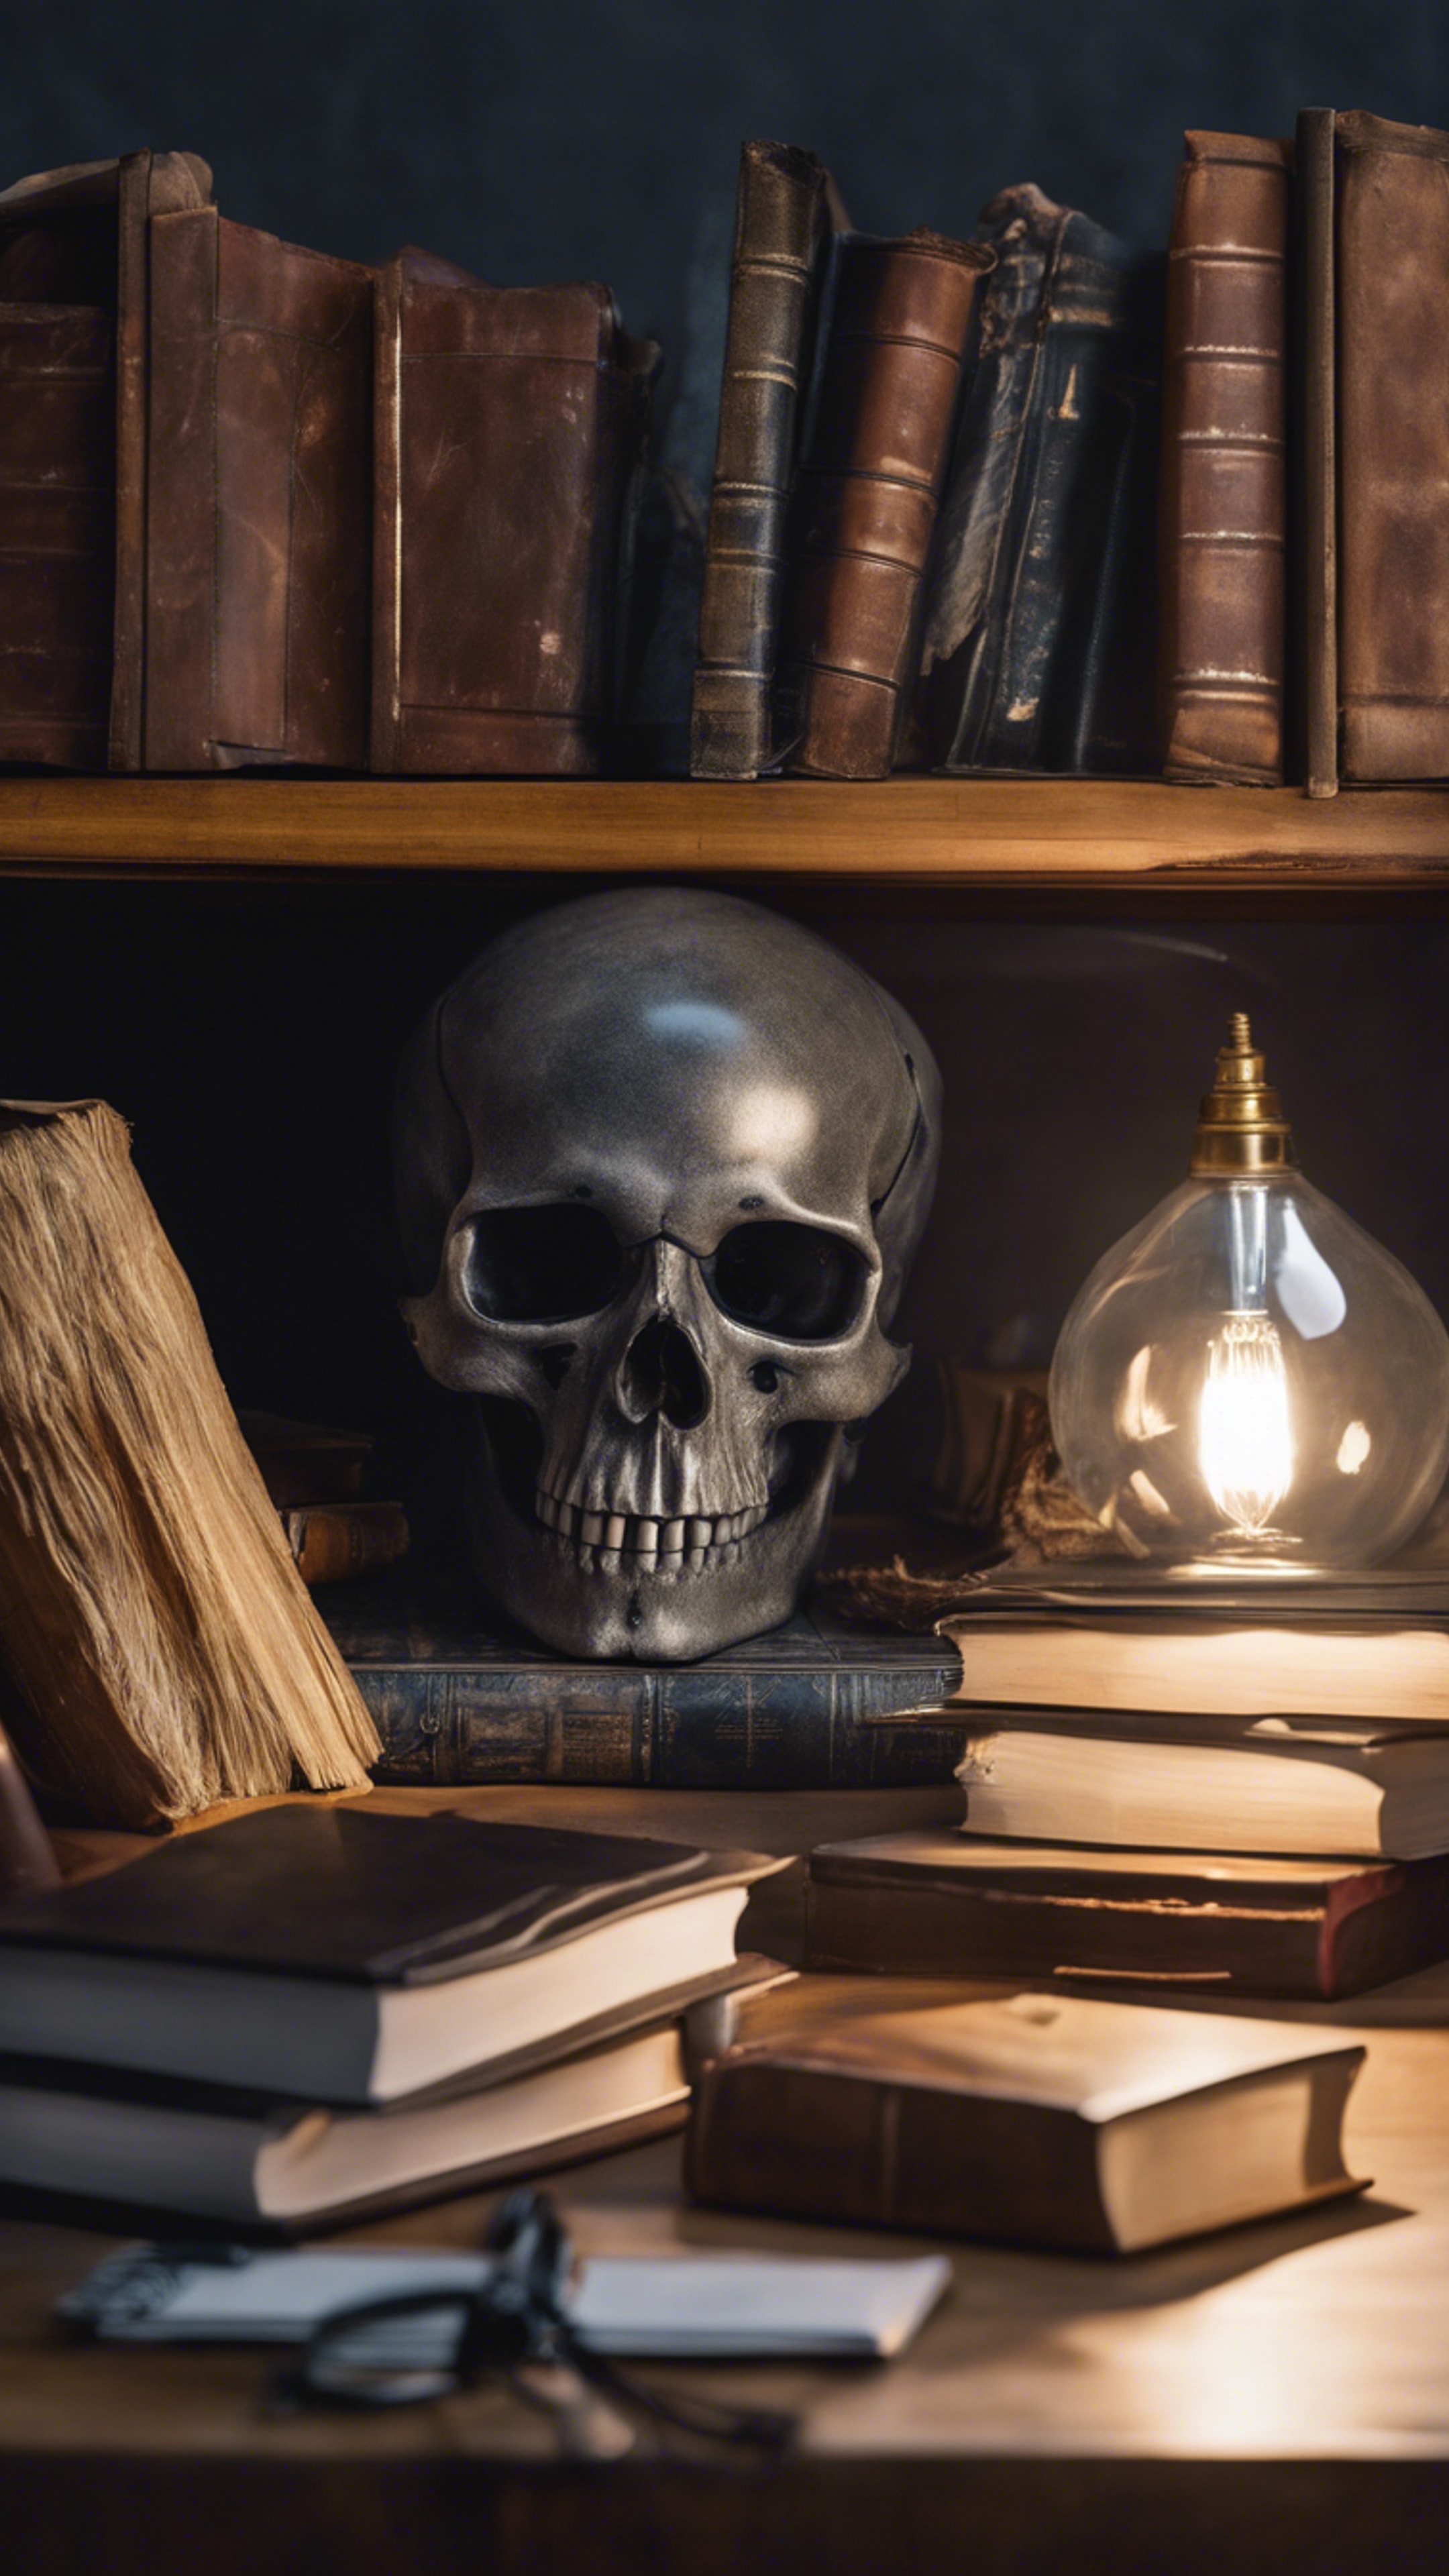 A study desk with a gray skull paperweight, surrounded by scattered books and a dimly lit lamp. Kertas dinding[9ada7a5adc764debb4f2]